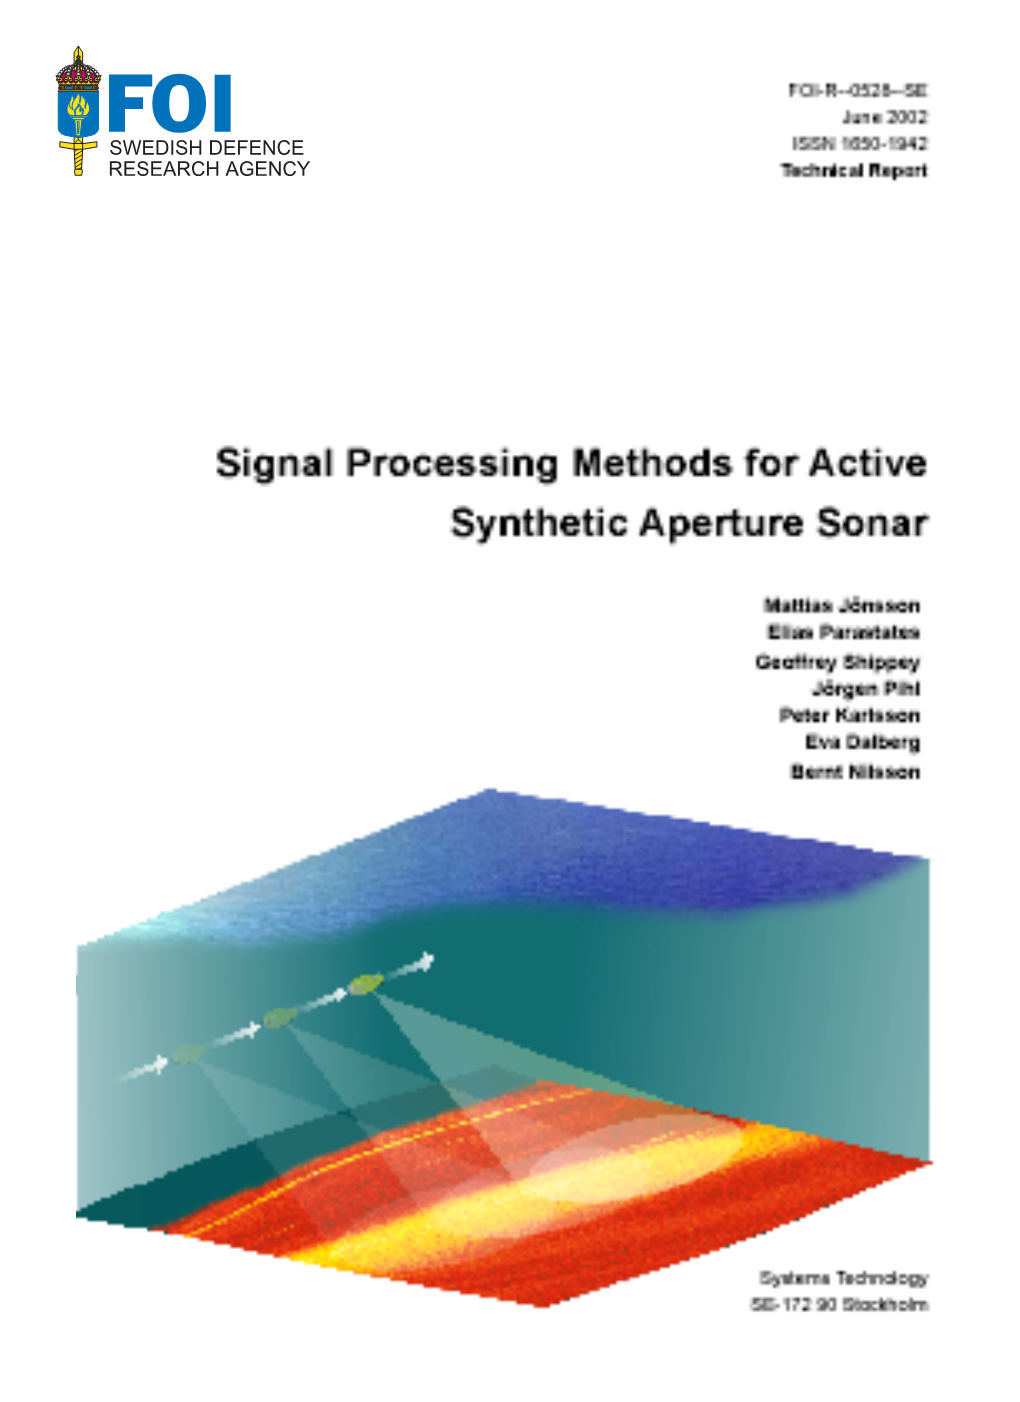 Signal Processing Methods for Active Synthetic Aperture Sonar